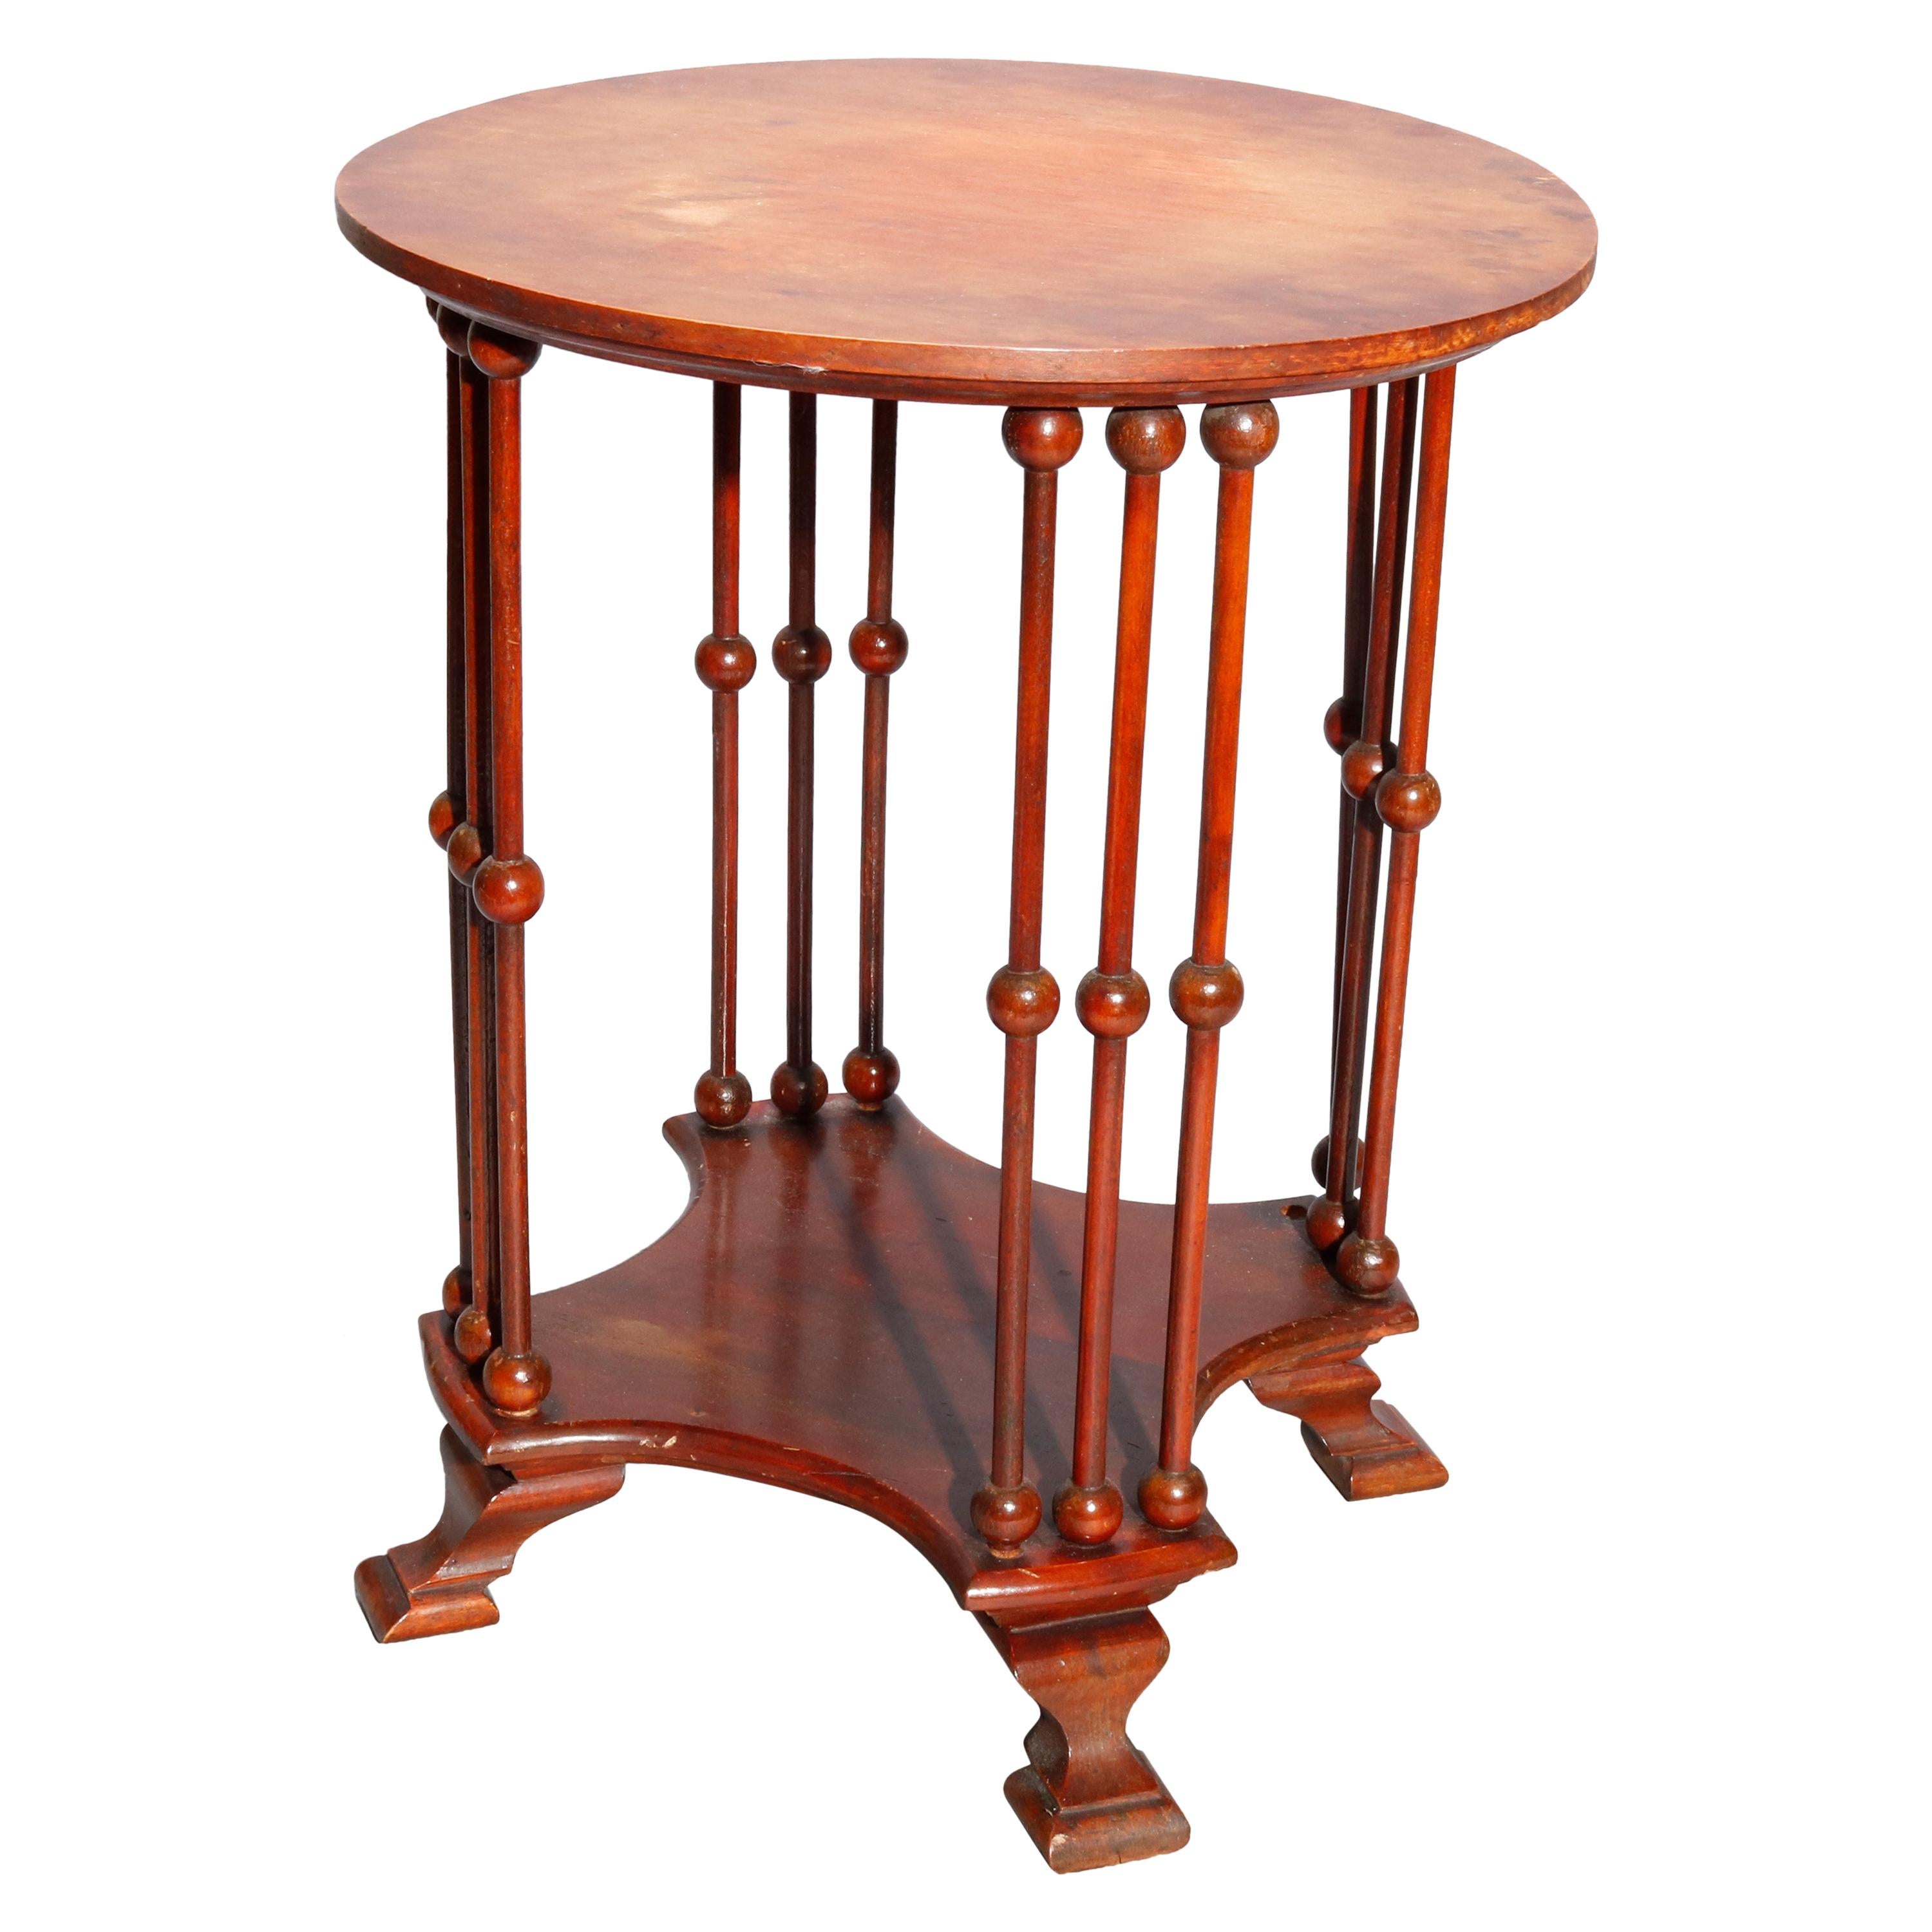 Antique Arts & Crafts Style Mahogany Stick and Ball Side Table, 20th Century